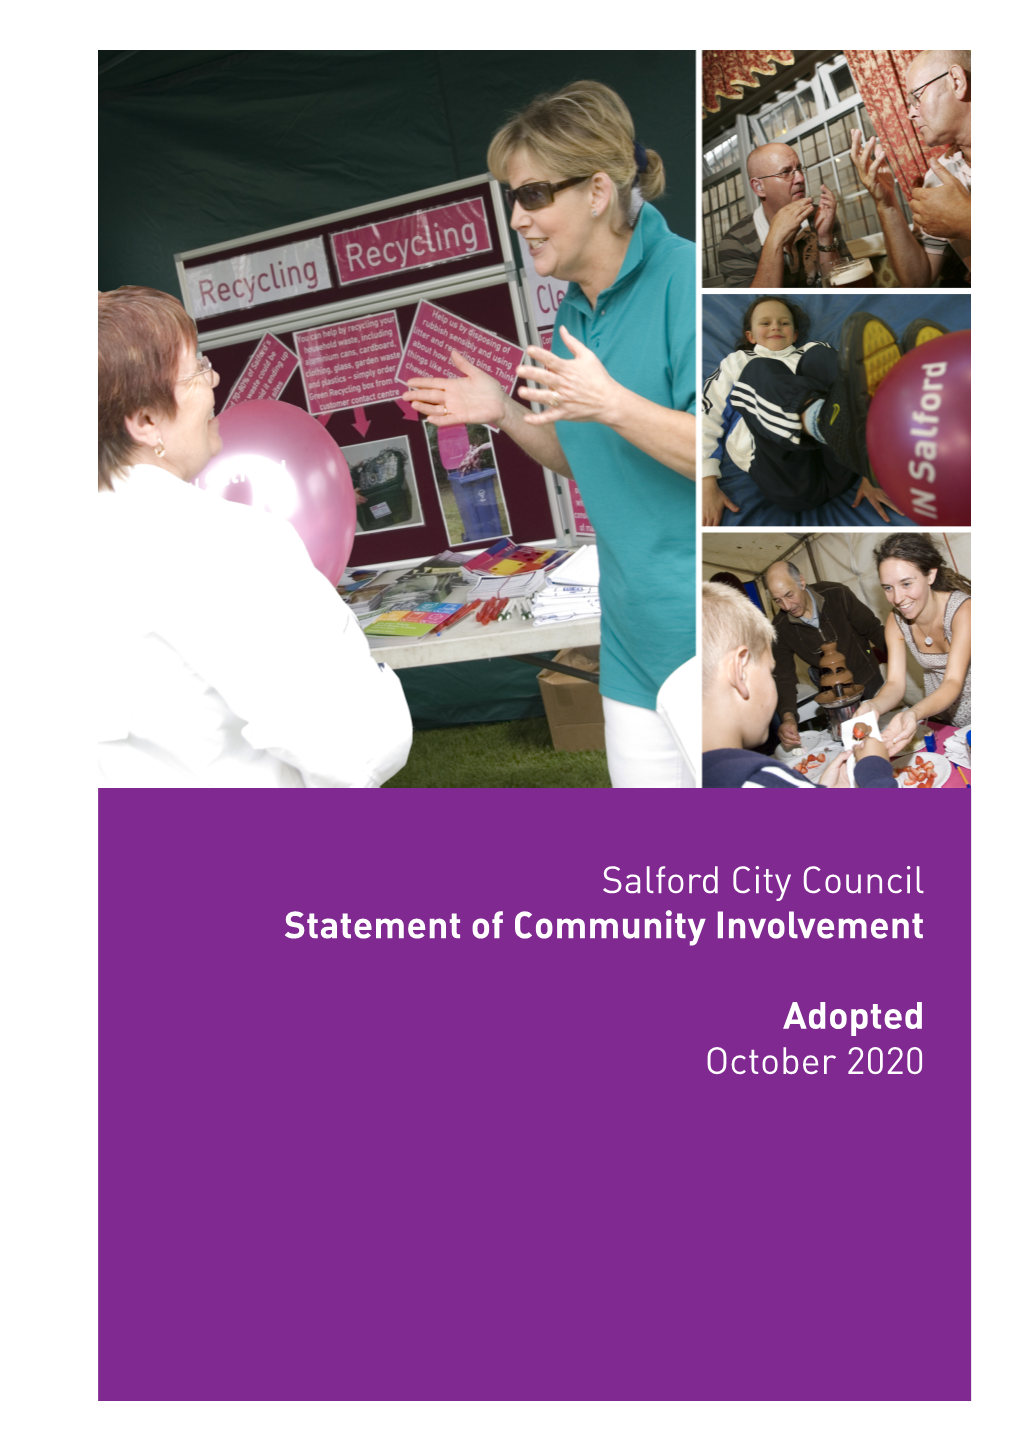 Salford City Council Statement of Community Involvement Adopted